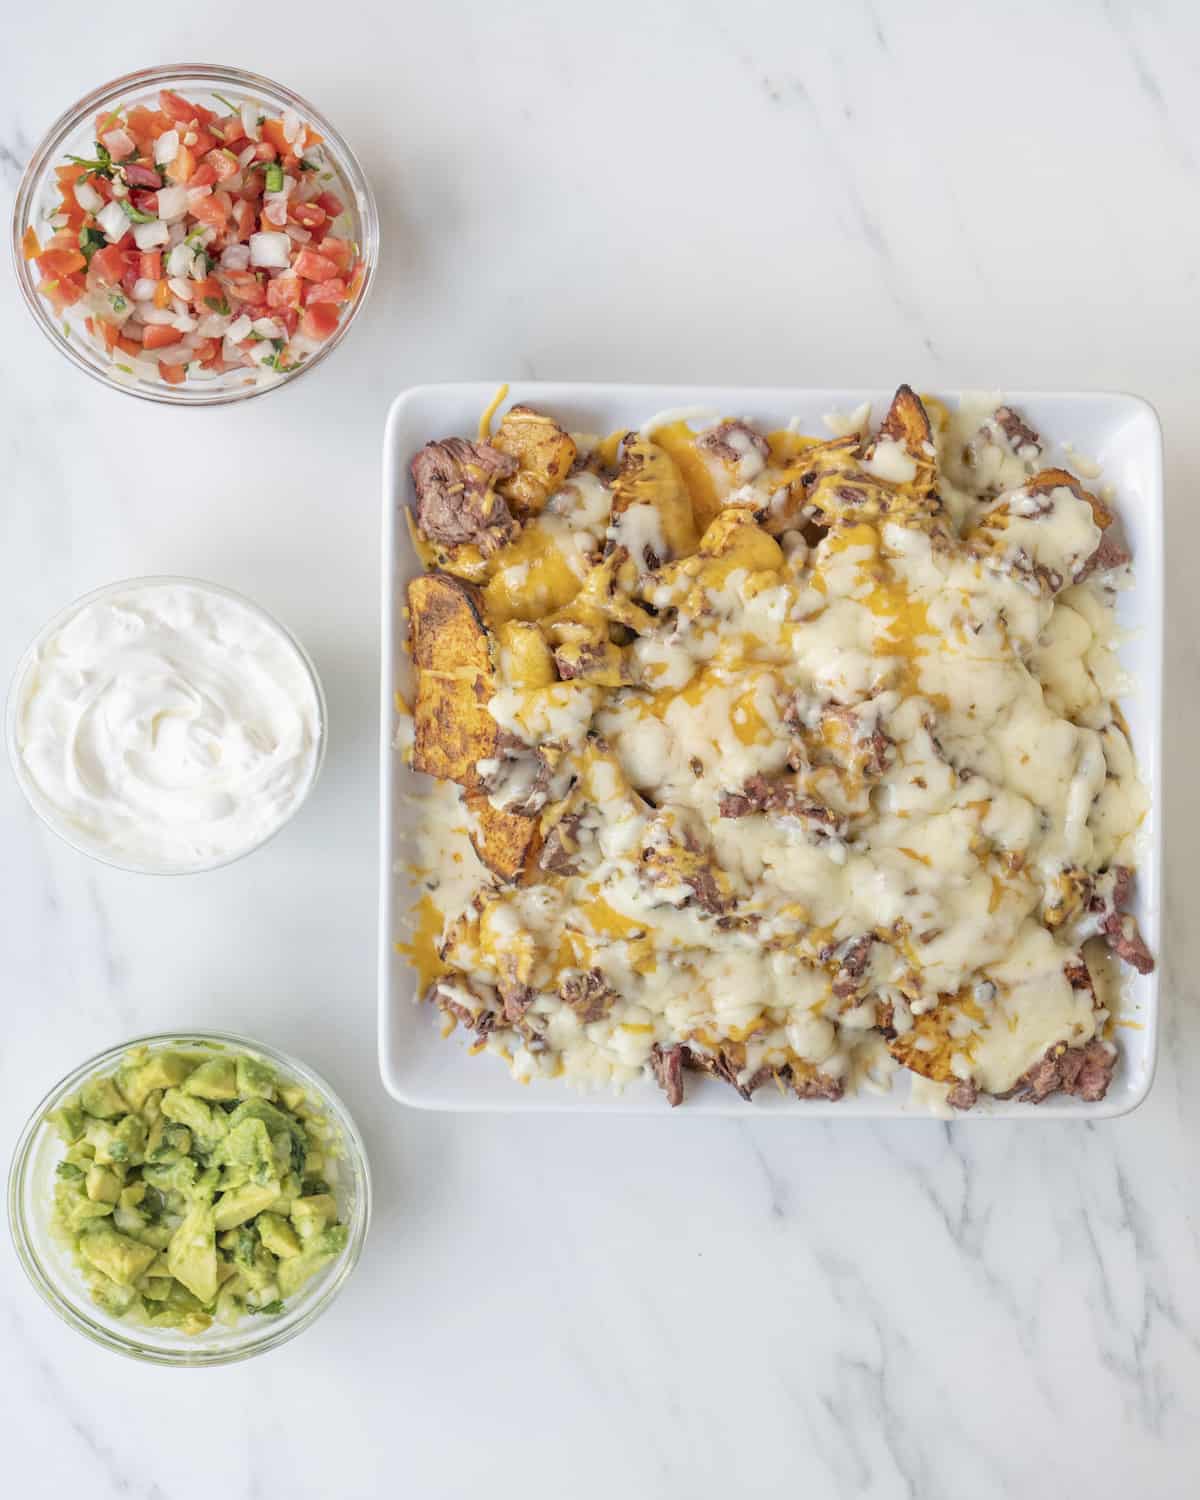 Assembled carne asada nacho fries on a white dish with three clear bowls of topping ingredients such as pico de gallo, sour cream, and guacamole on a white countertop.